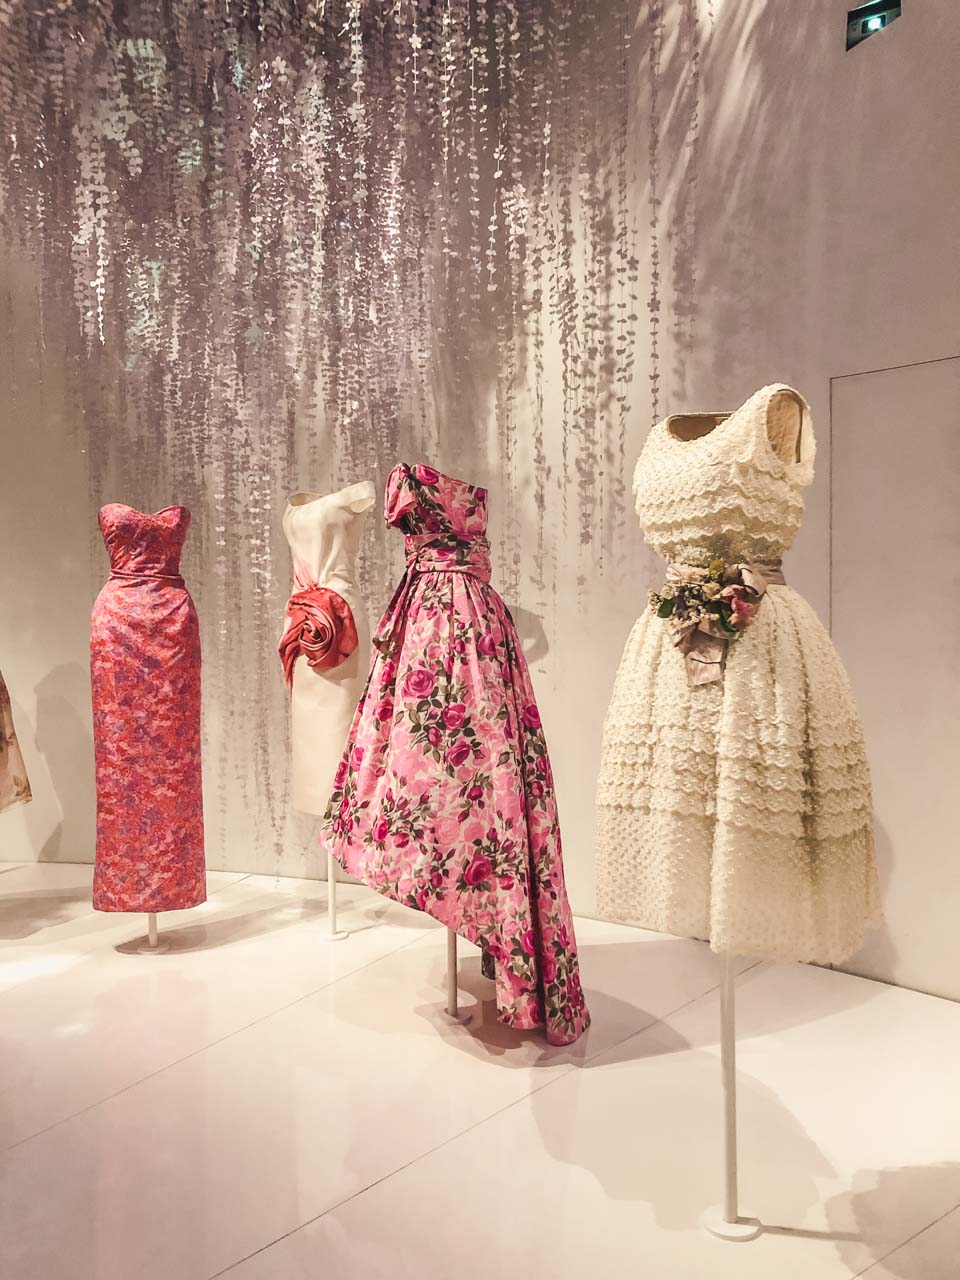 Dior gowns on display in the garden room of the Dior exhibition at the Victoria and Albert Museum